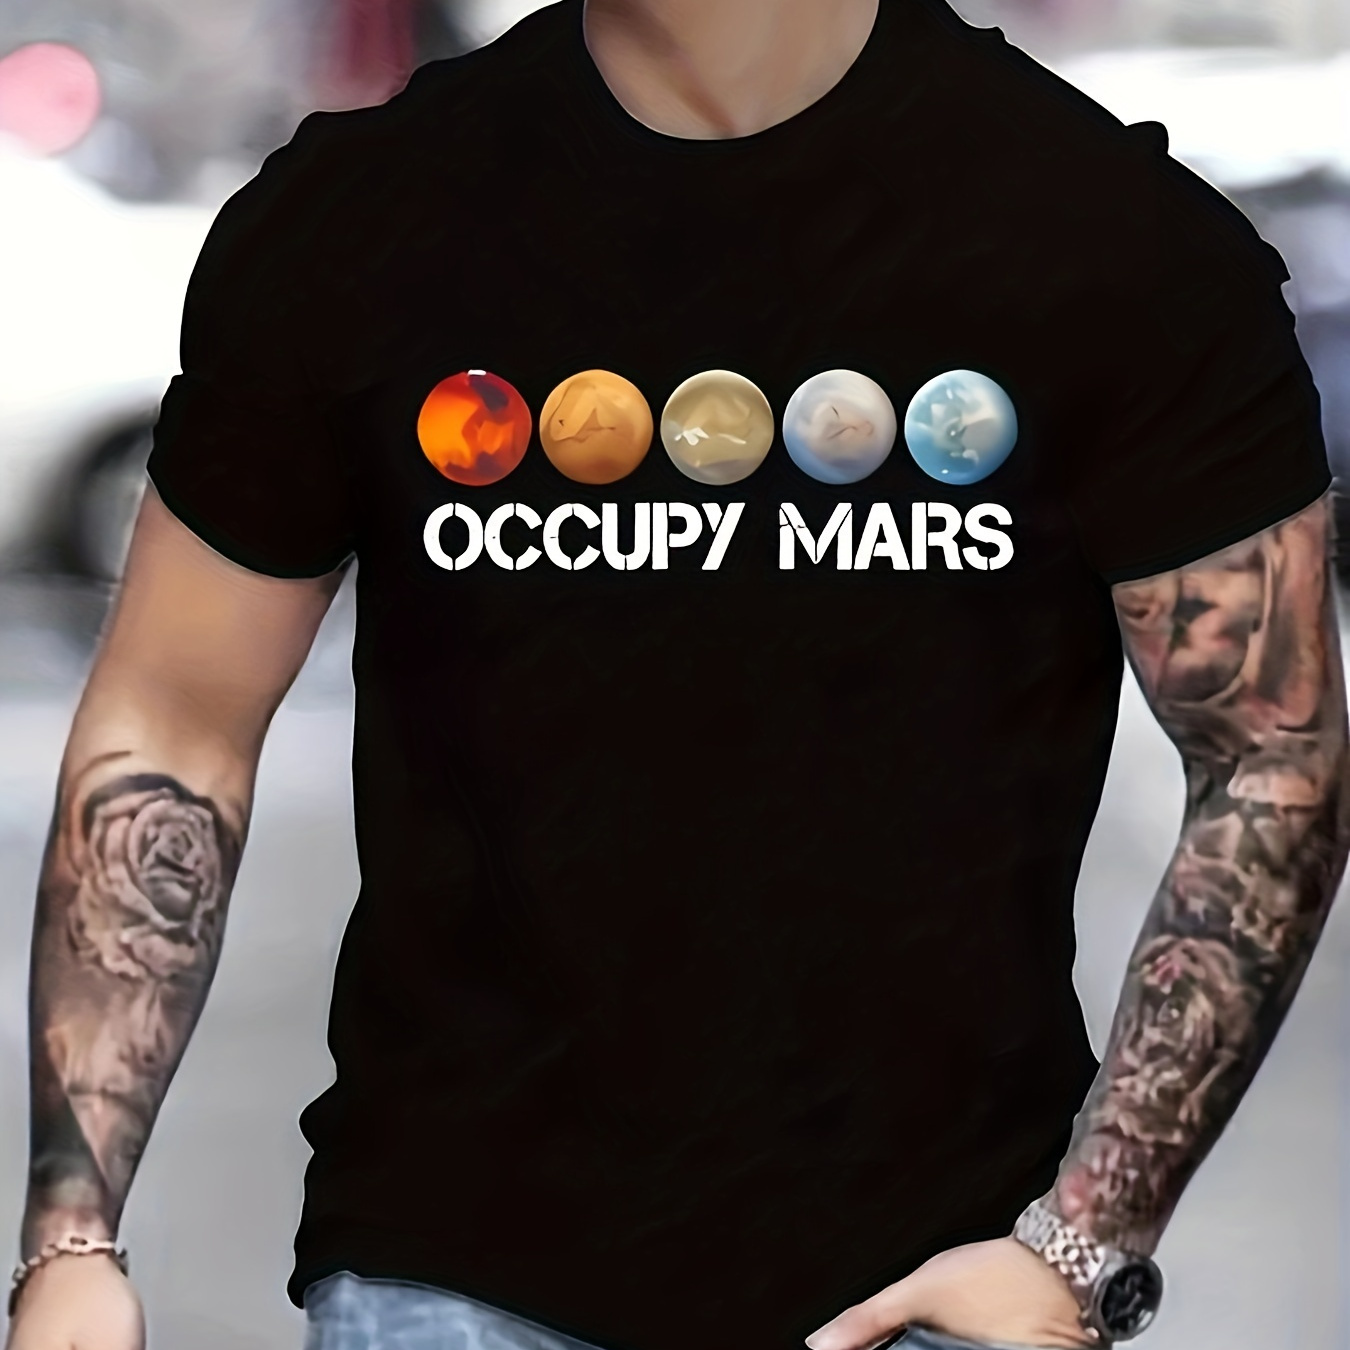 

Occupy Mars Print, Men's Graphic T-shirt, Casual Comfy Tees For Summer, Mens Clothing